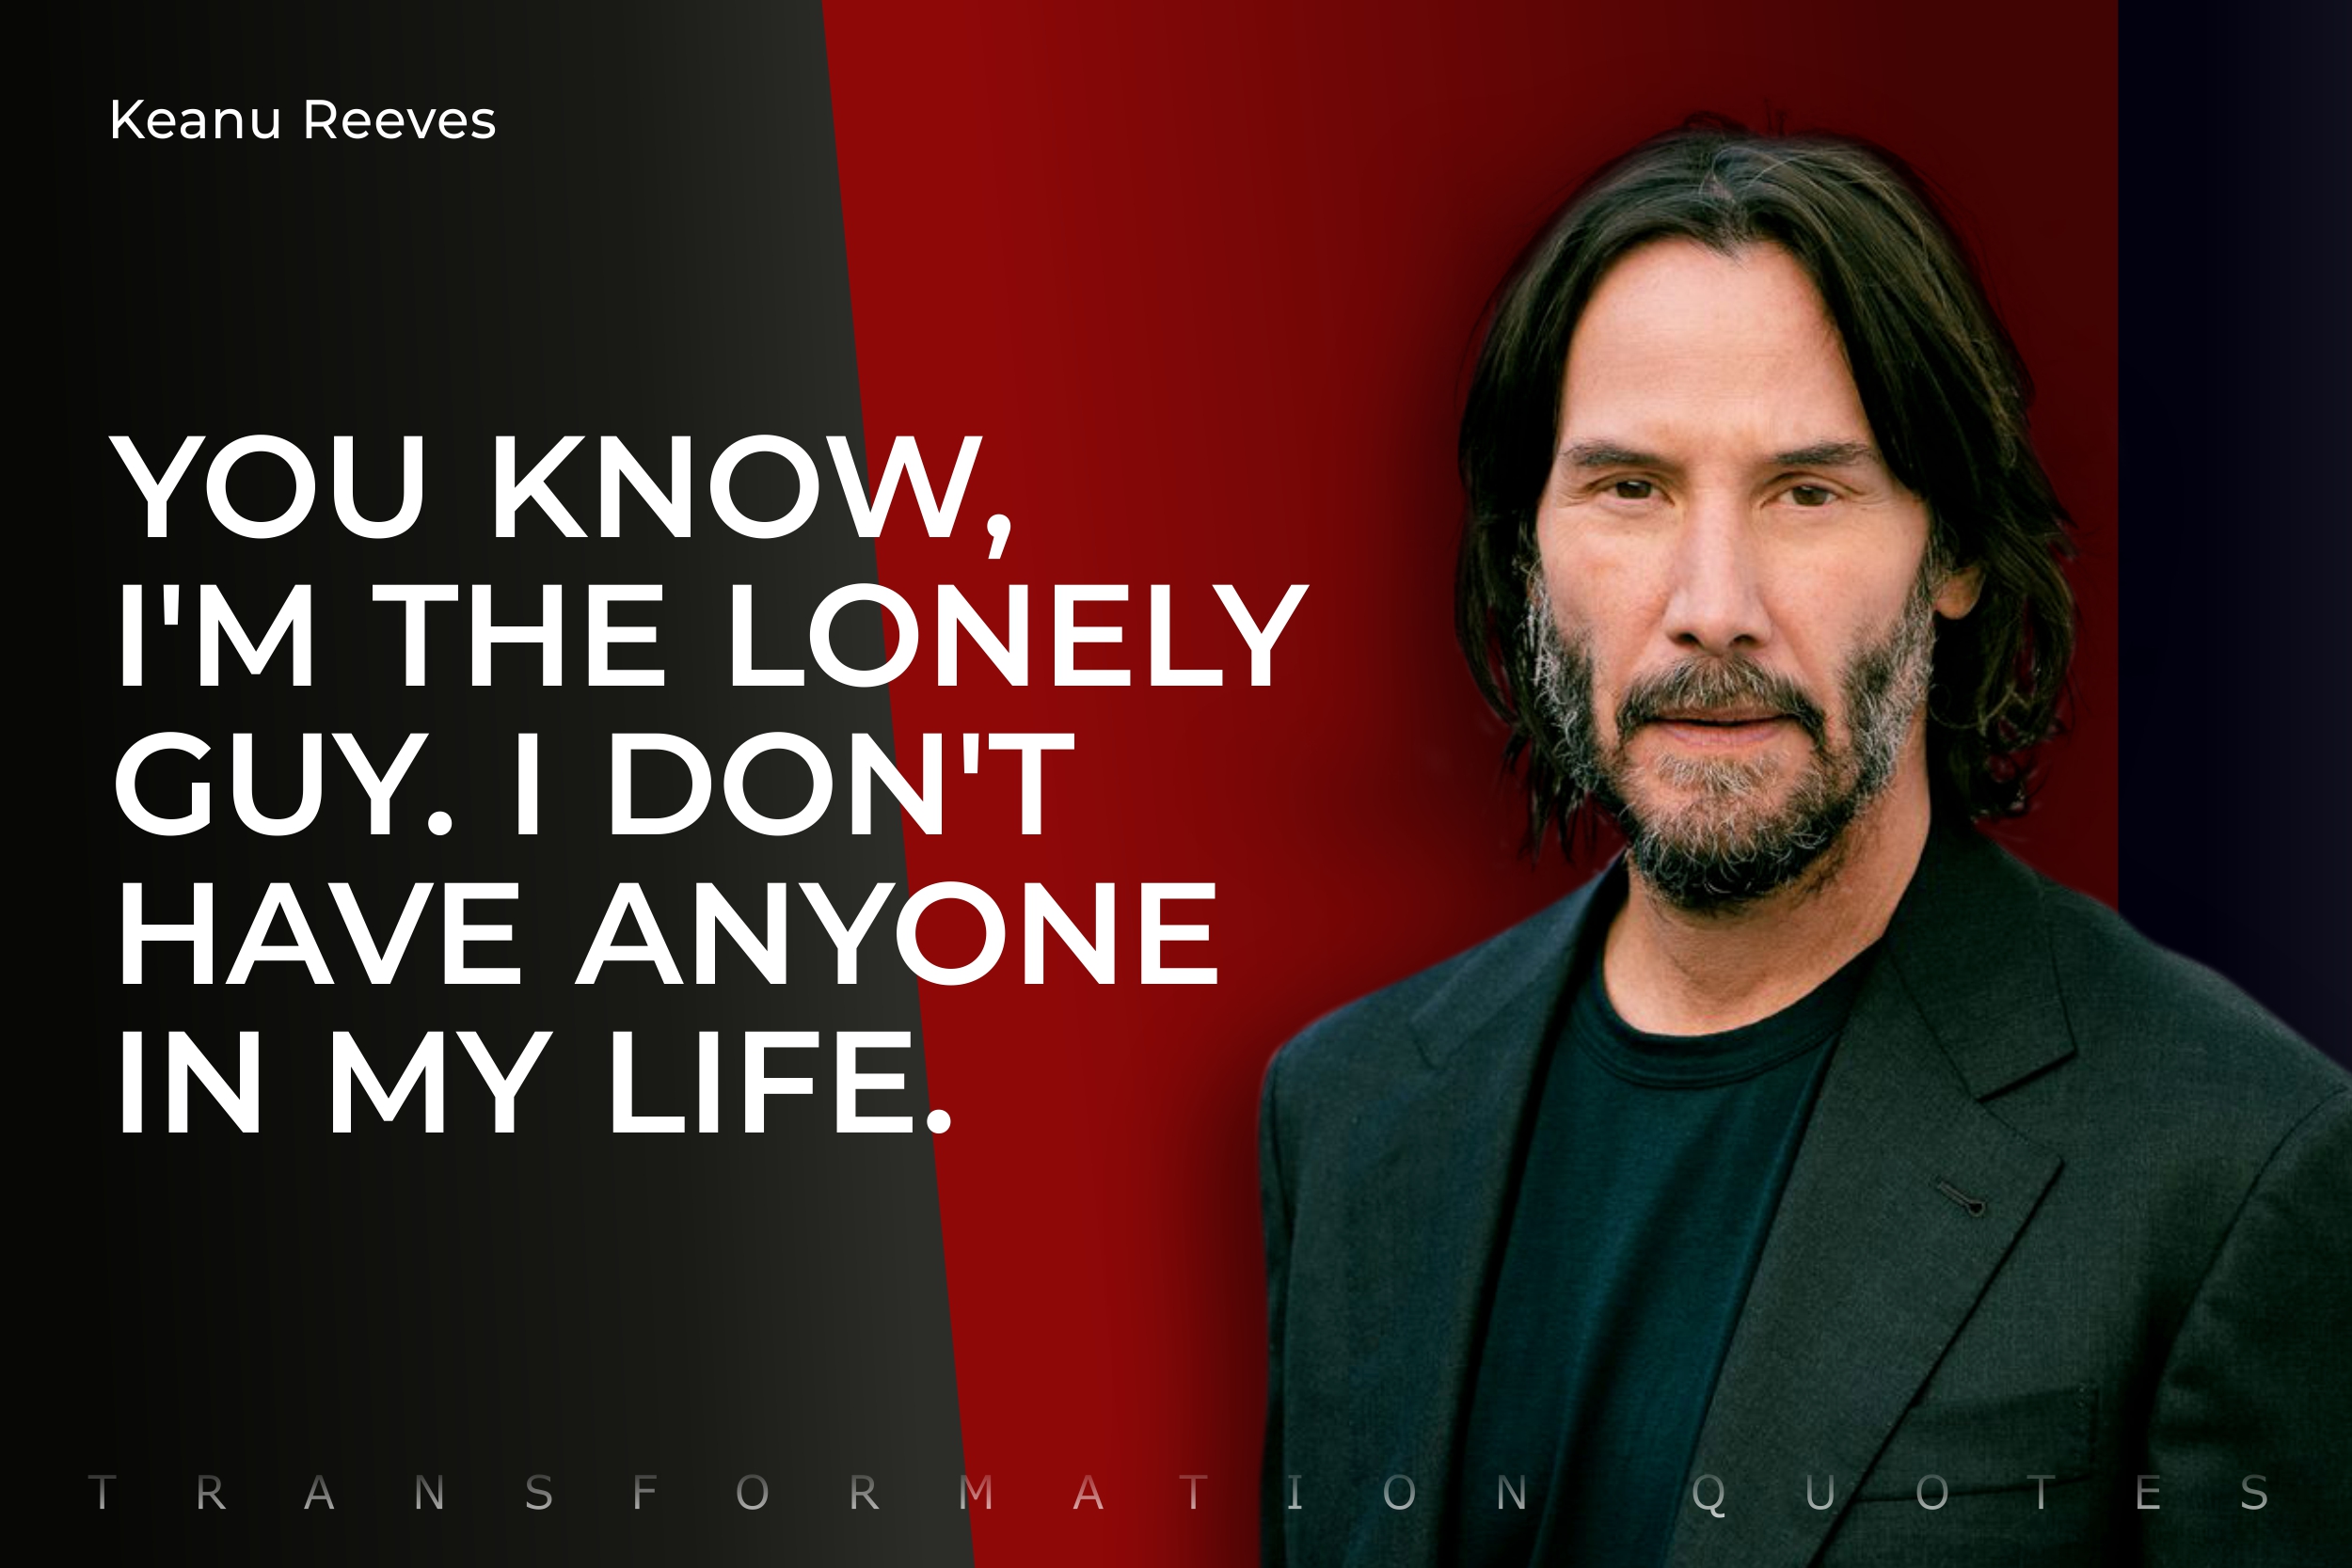 10 Keanu Reeves Quotes That Will Inspire You | TransformationQuotes